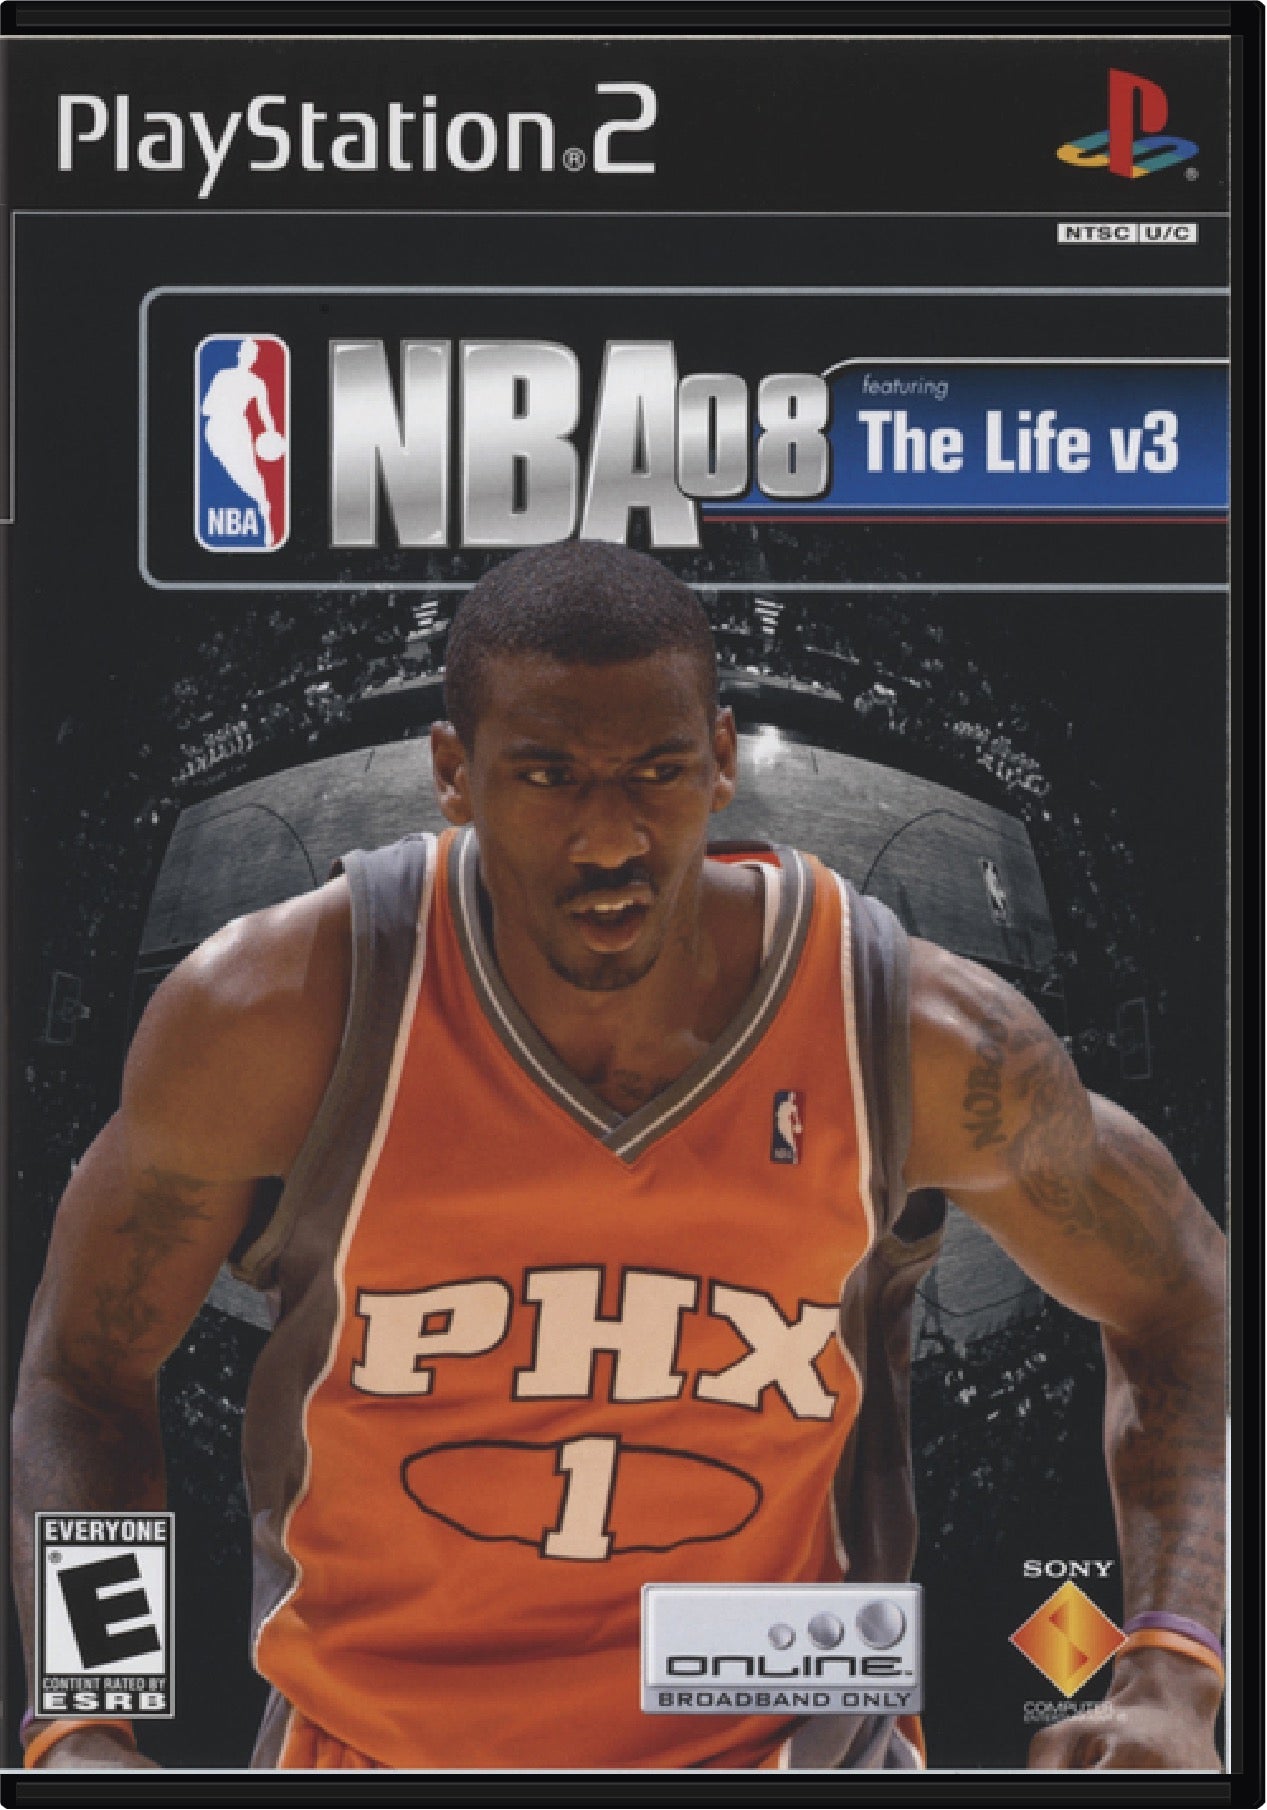 NBA 08 Cover Art and Product Photo